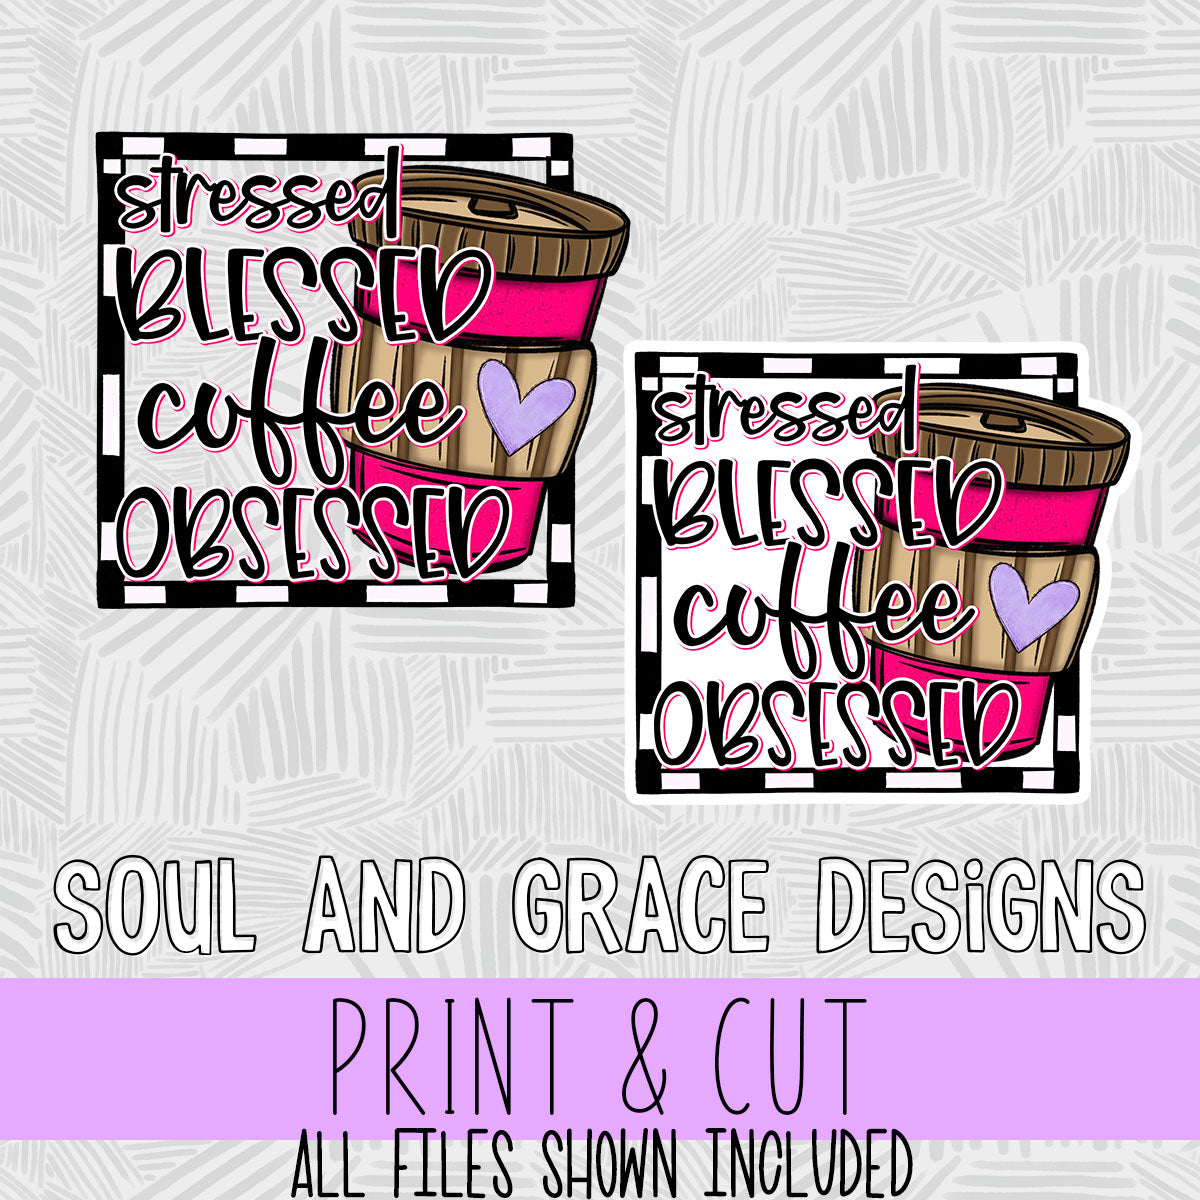 Stressed Blessed Coffee Obsessed [Print and Cut Design]